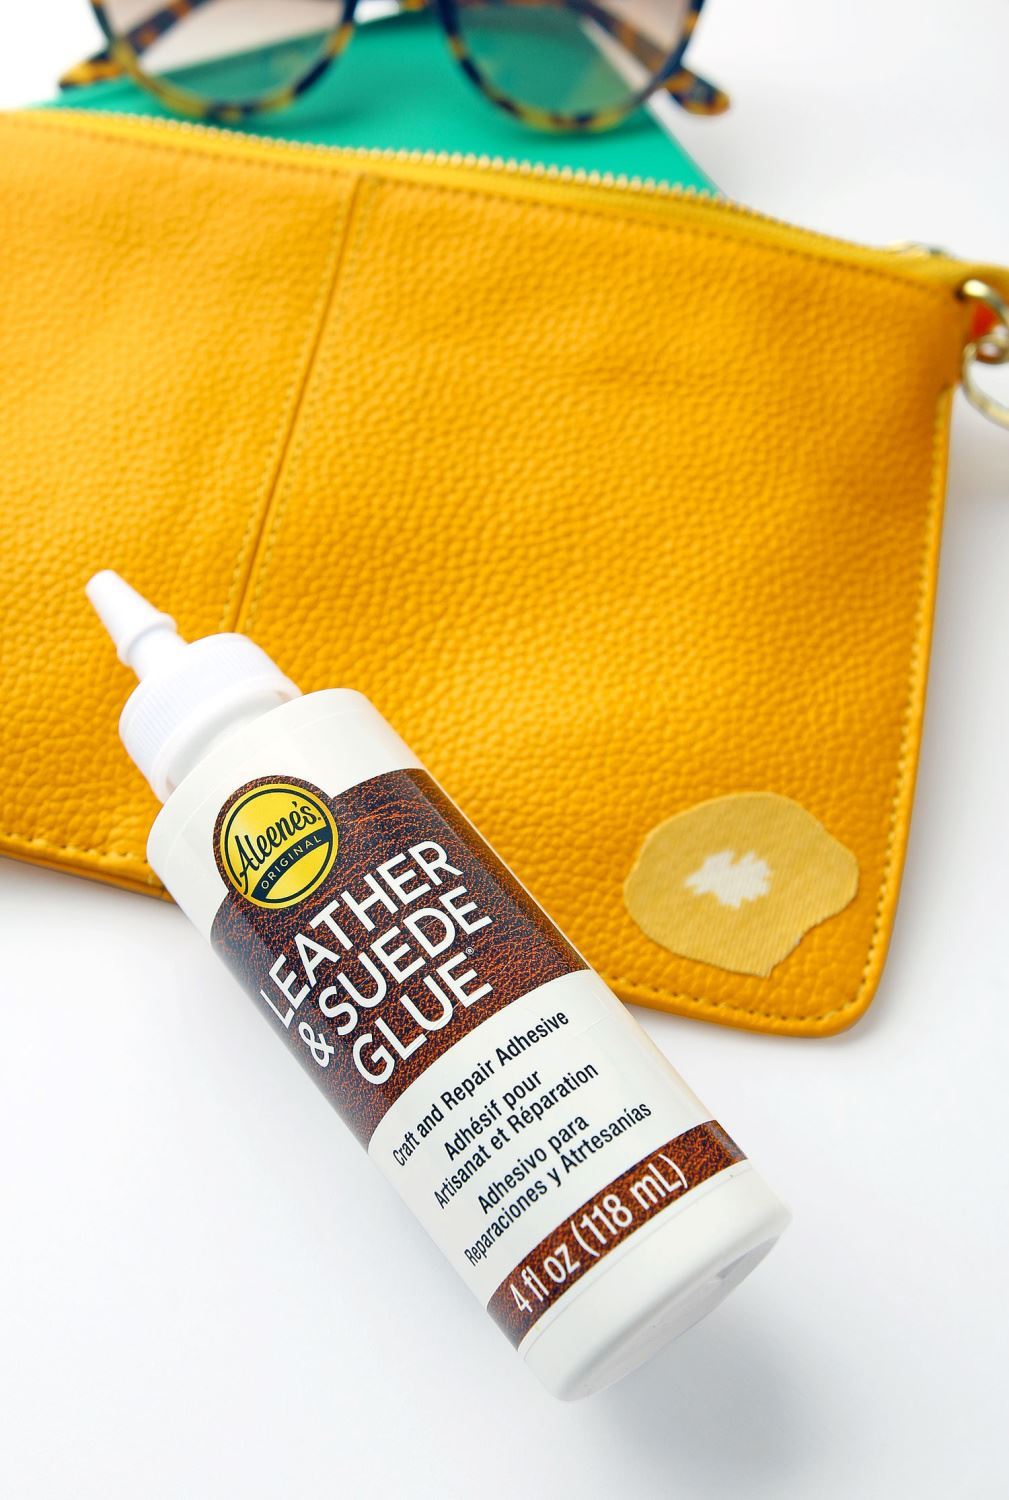 Aleene's Original Glues - How To Repair a Leather Tear with Leather Glue